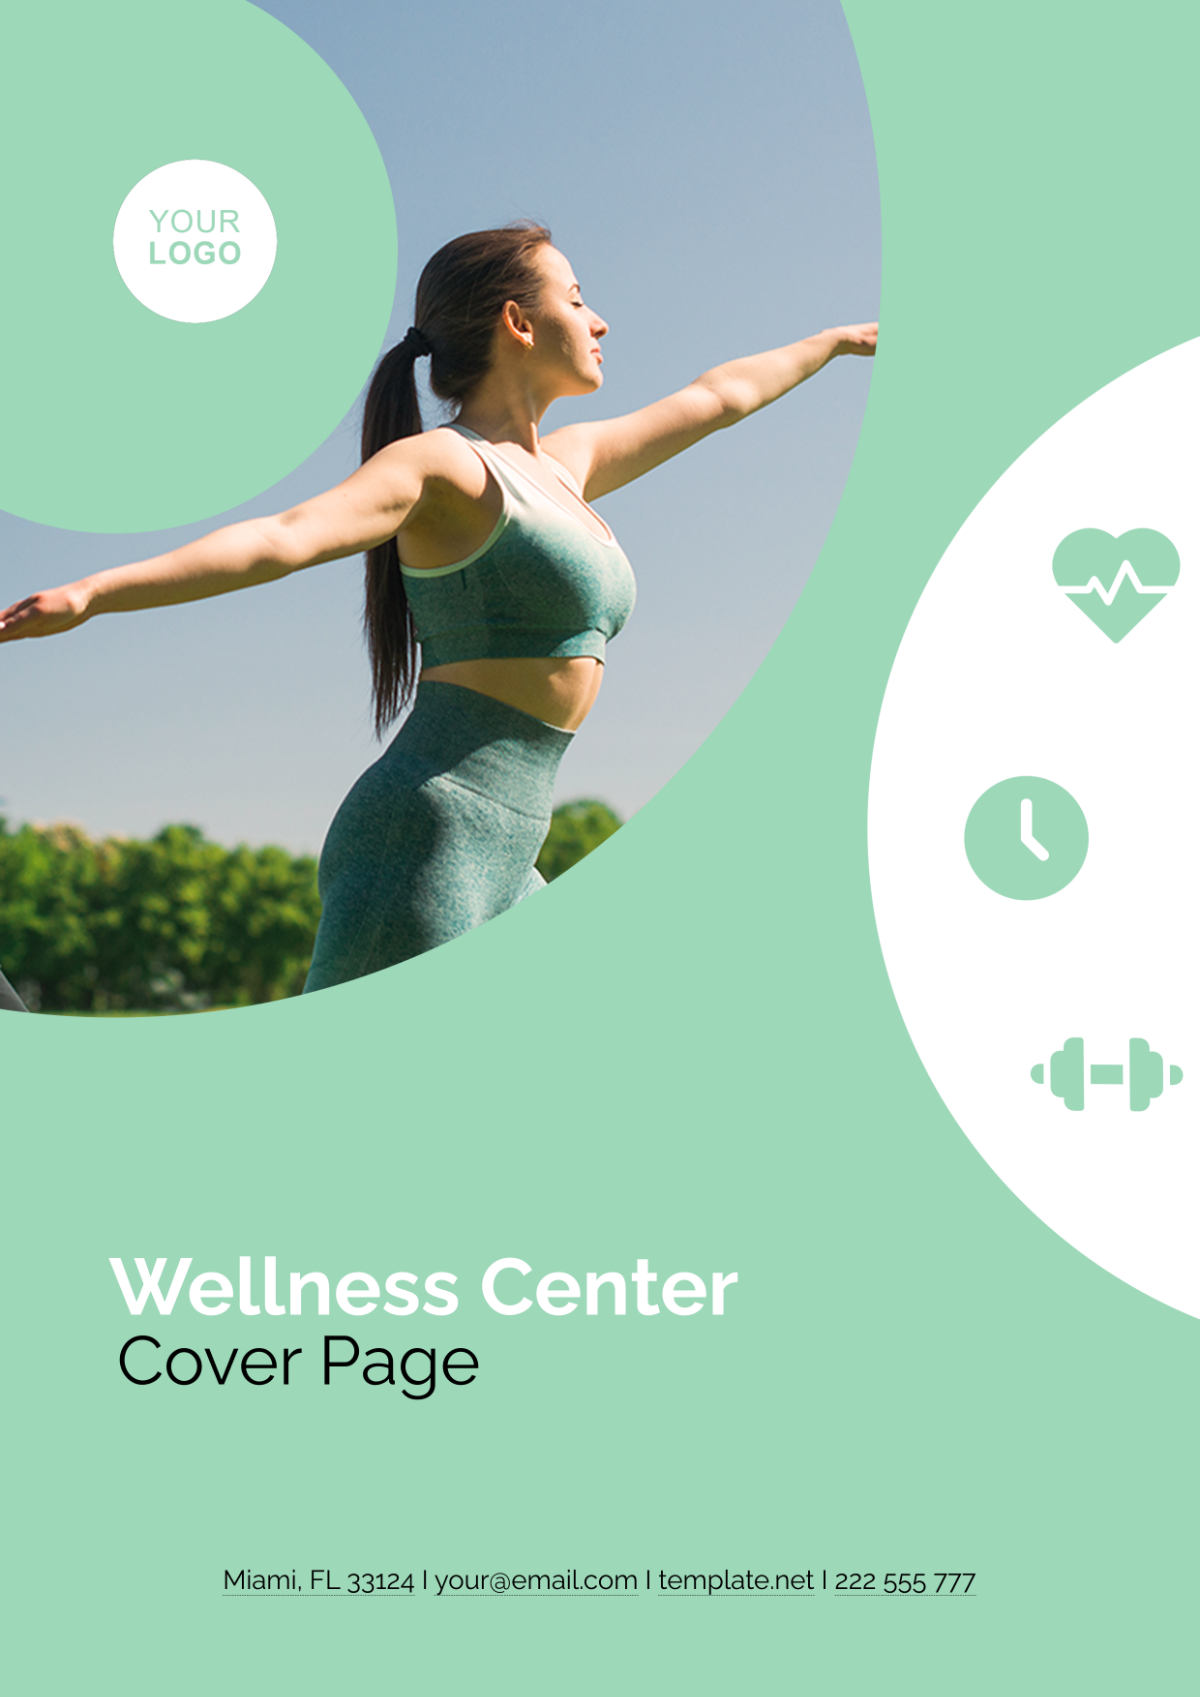 Wellness Center Cover Page Address